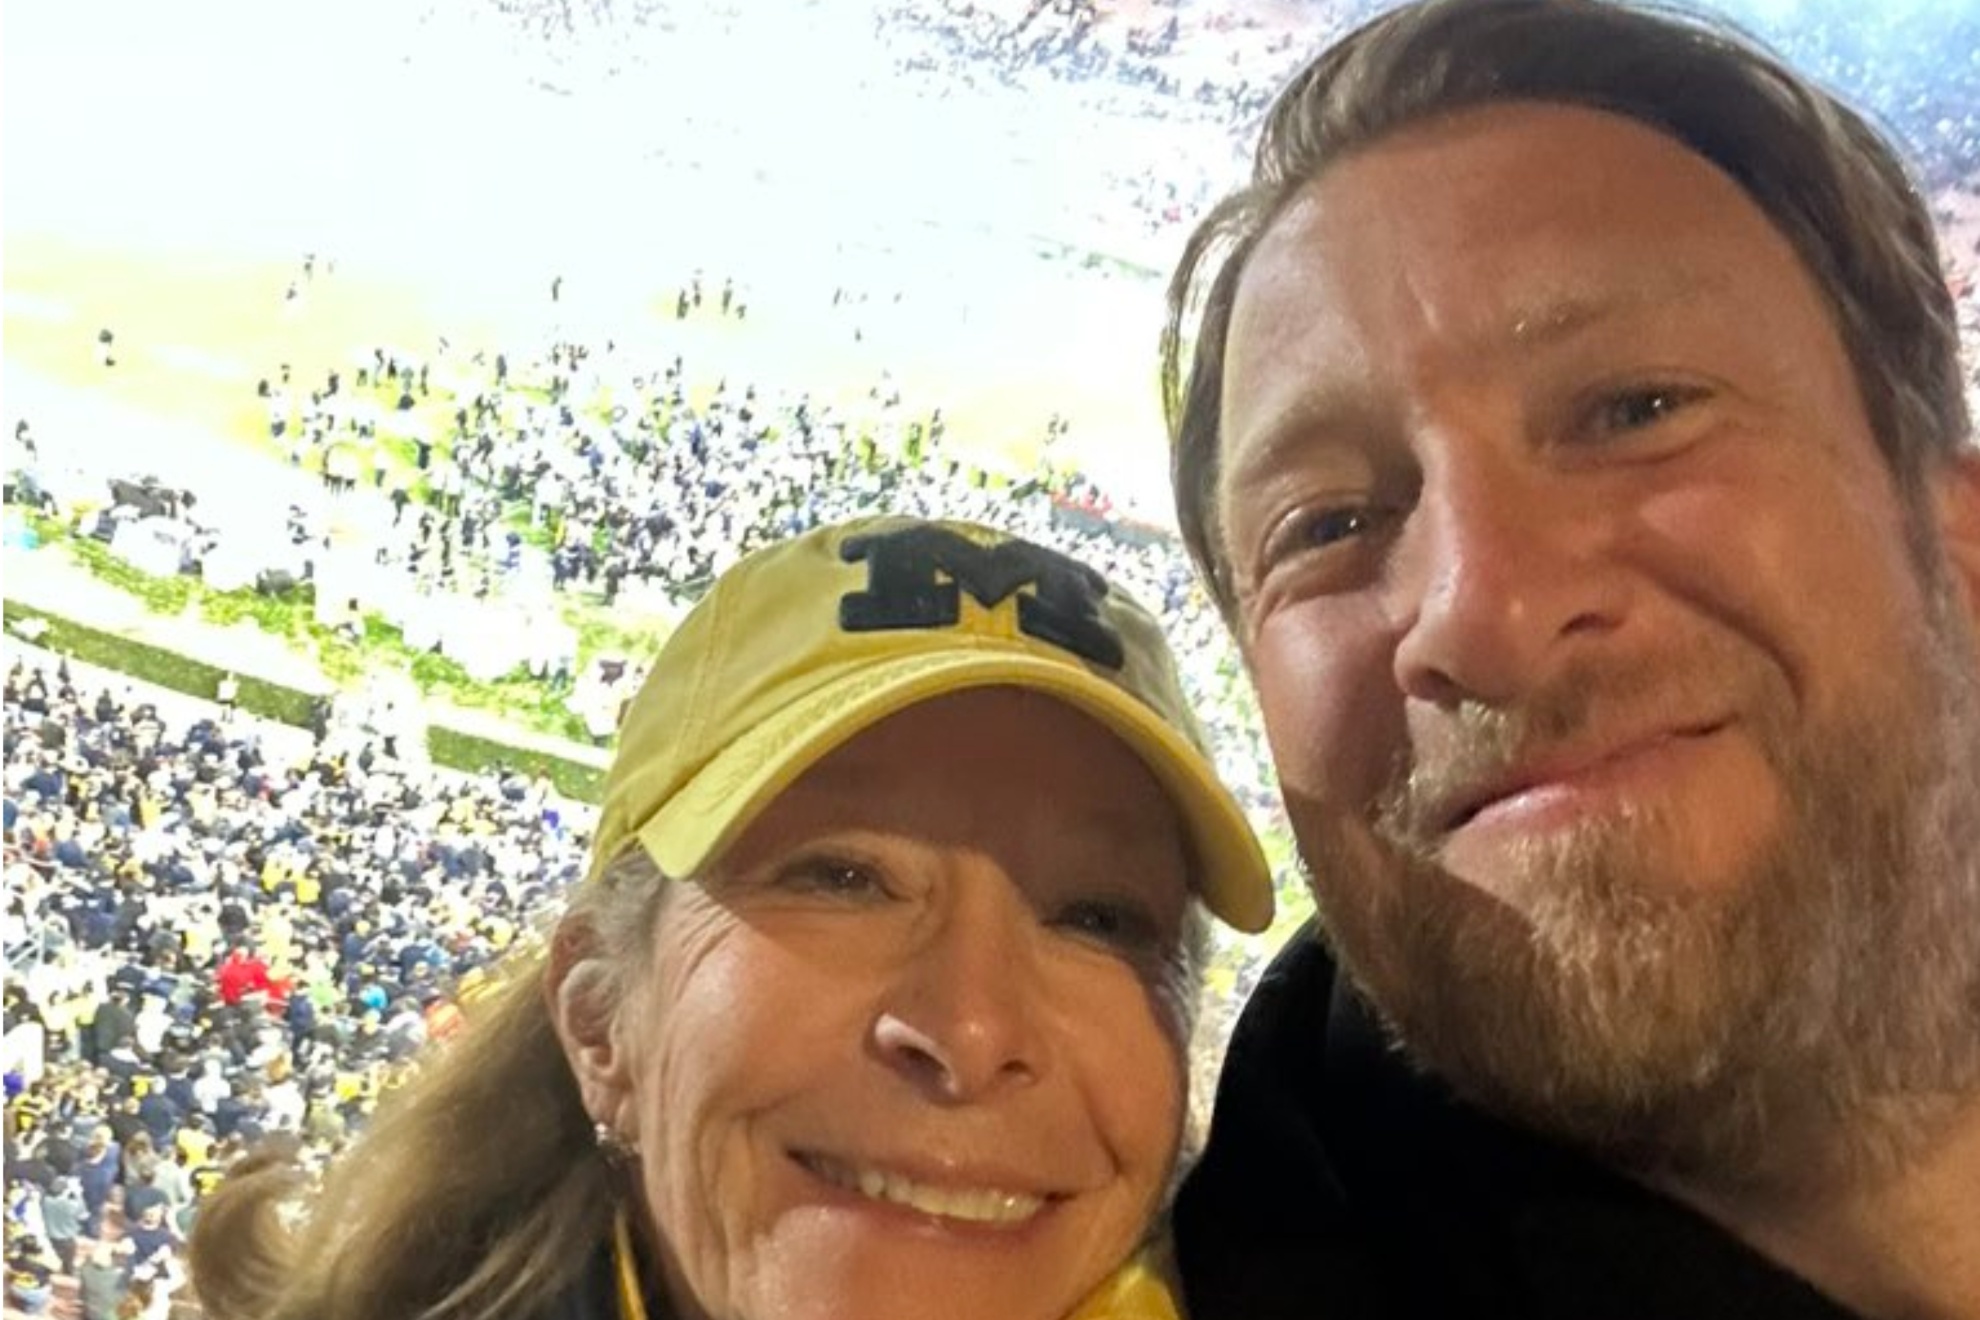 Dave Portnoy and his mother Linda celebrating at the Rose Bowl.